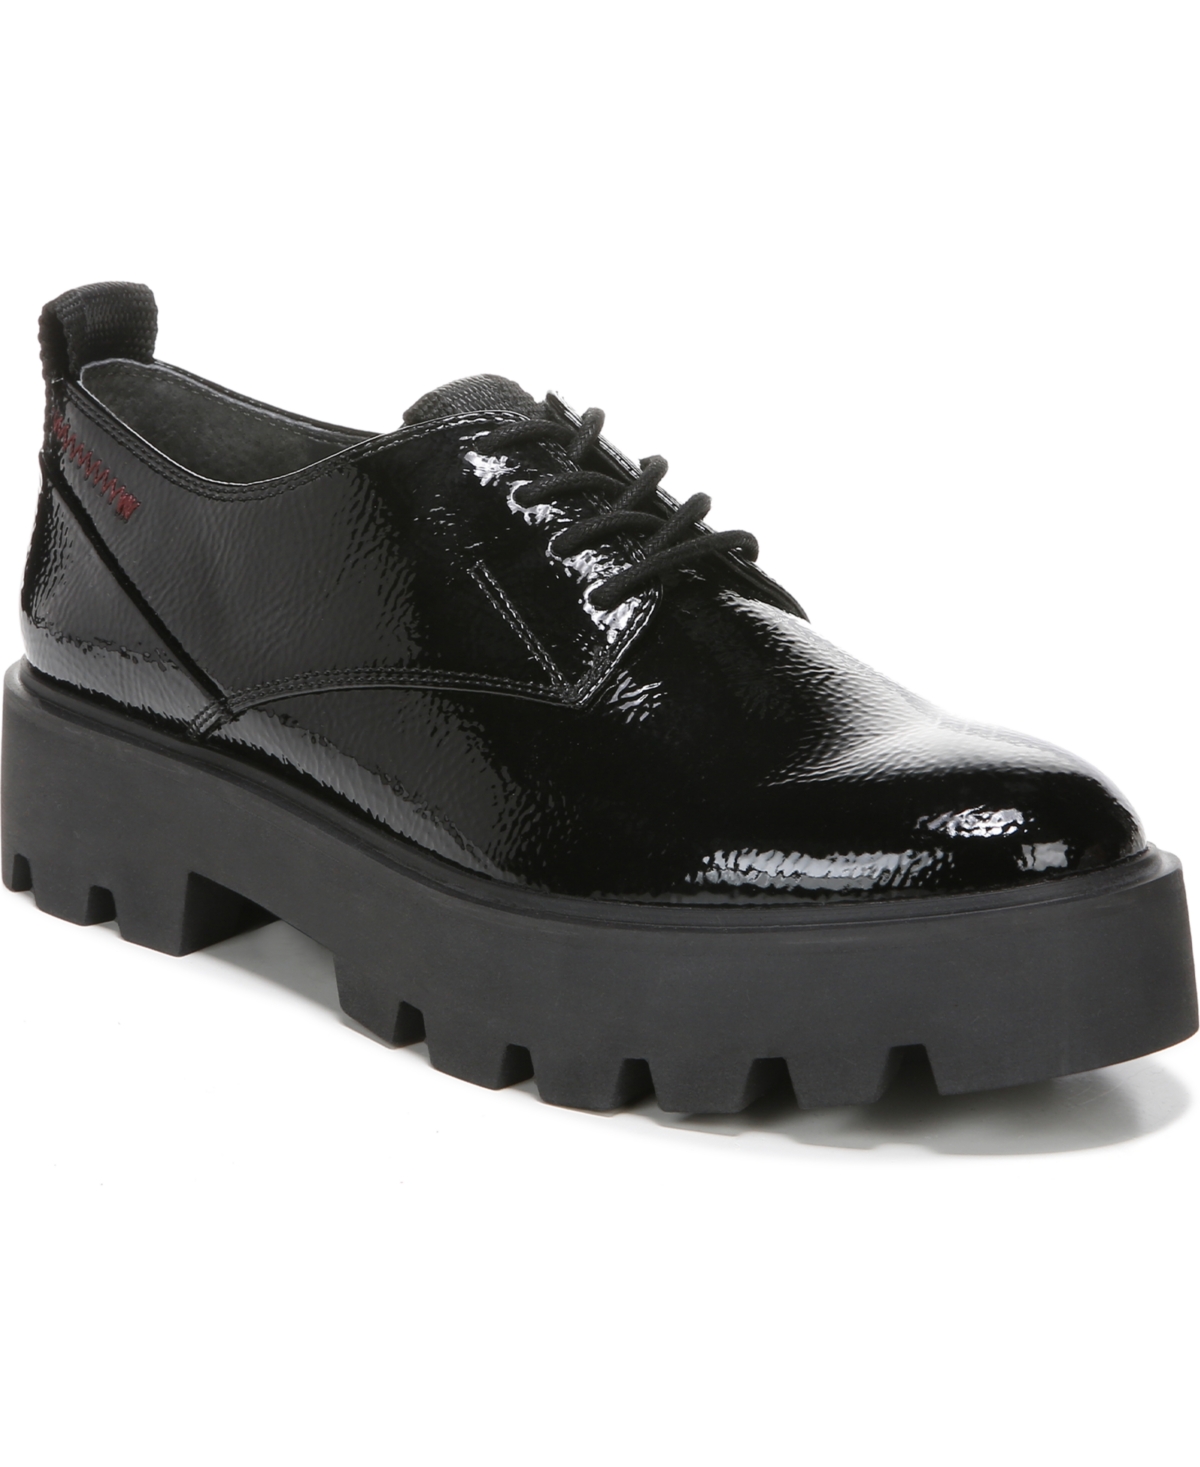 UPC 017138587389 product image for Franco Sarto Balin-Laced Lug Sole Oxfords Women's Shoes | upcitemdb.com